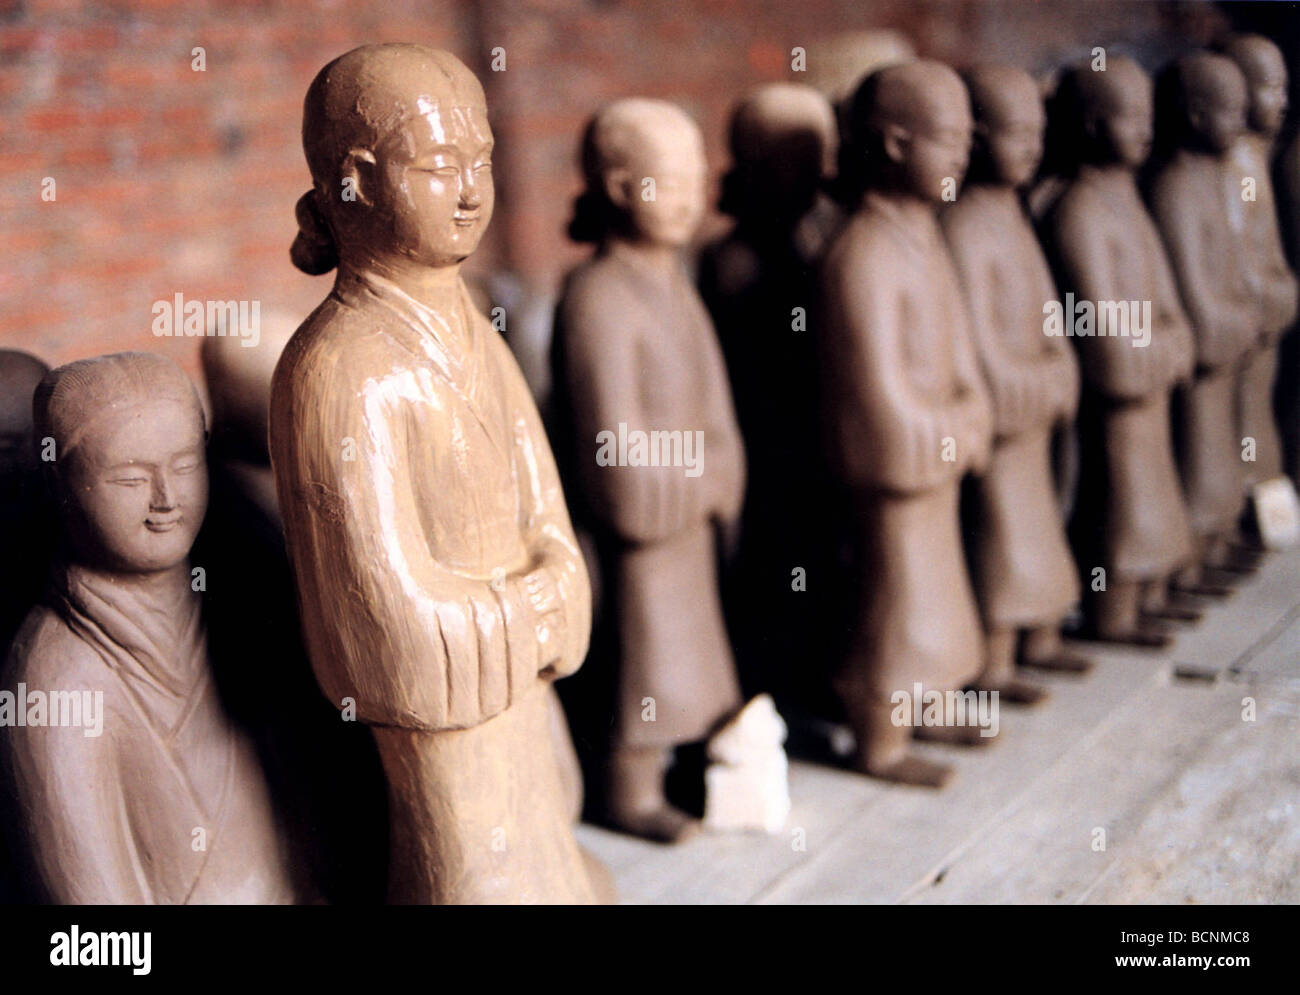 Clay mold of Tang Dynasty Tri-colored glazed figurines, Henan Province, China Stock Photo